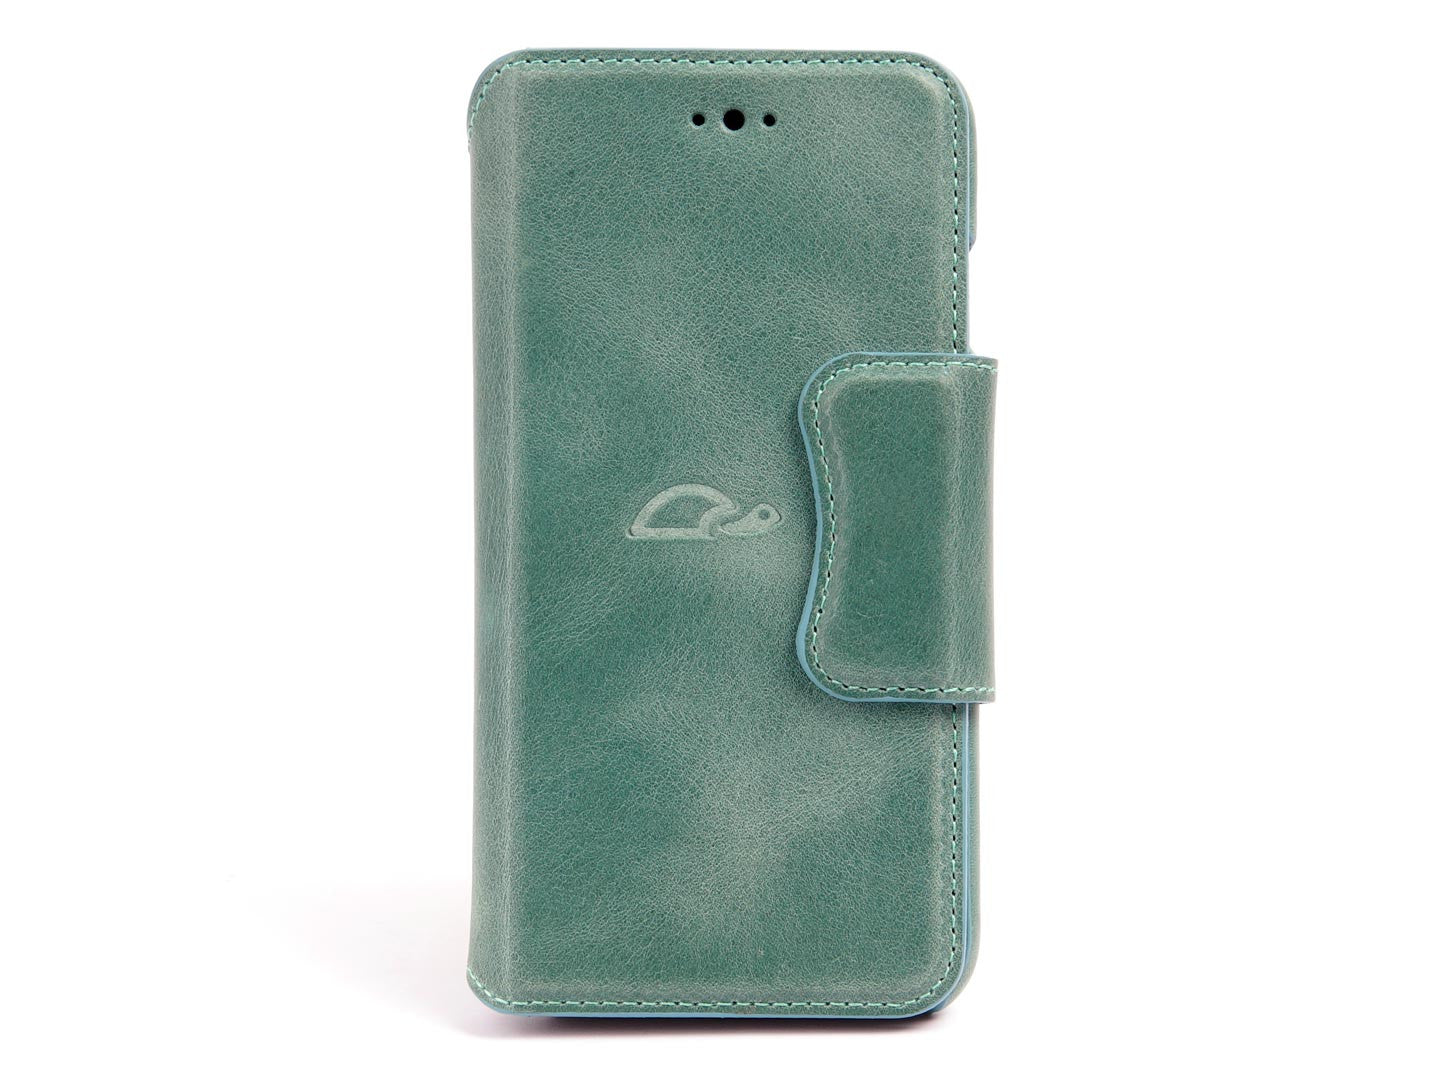 iPhone 7 / 7 Plus / 8 / 8 Plus Leather Wallet Case - Turquoise -